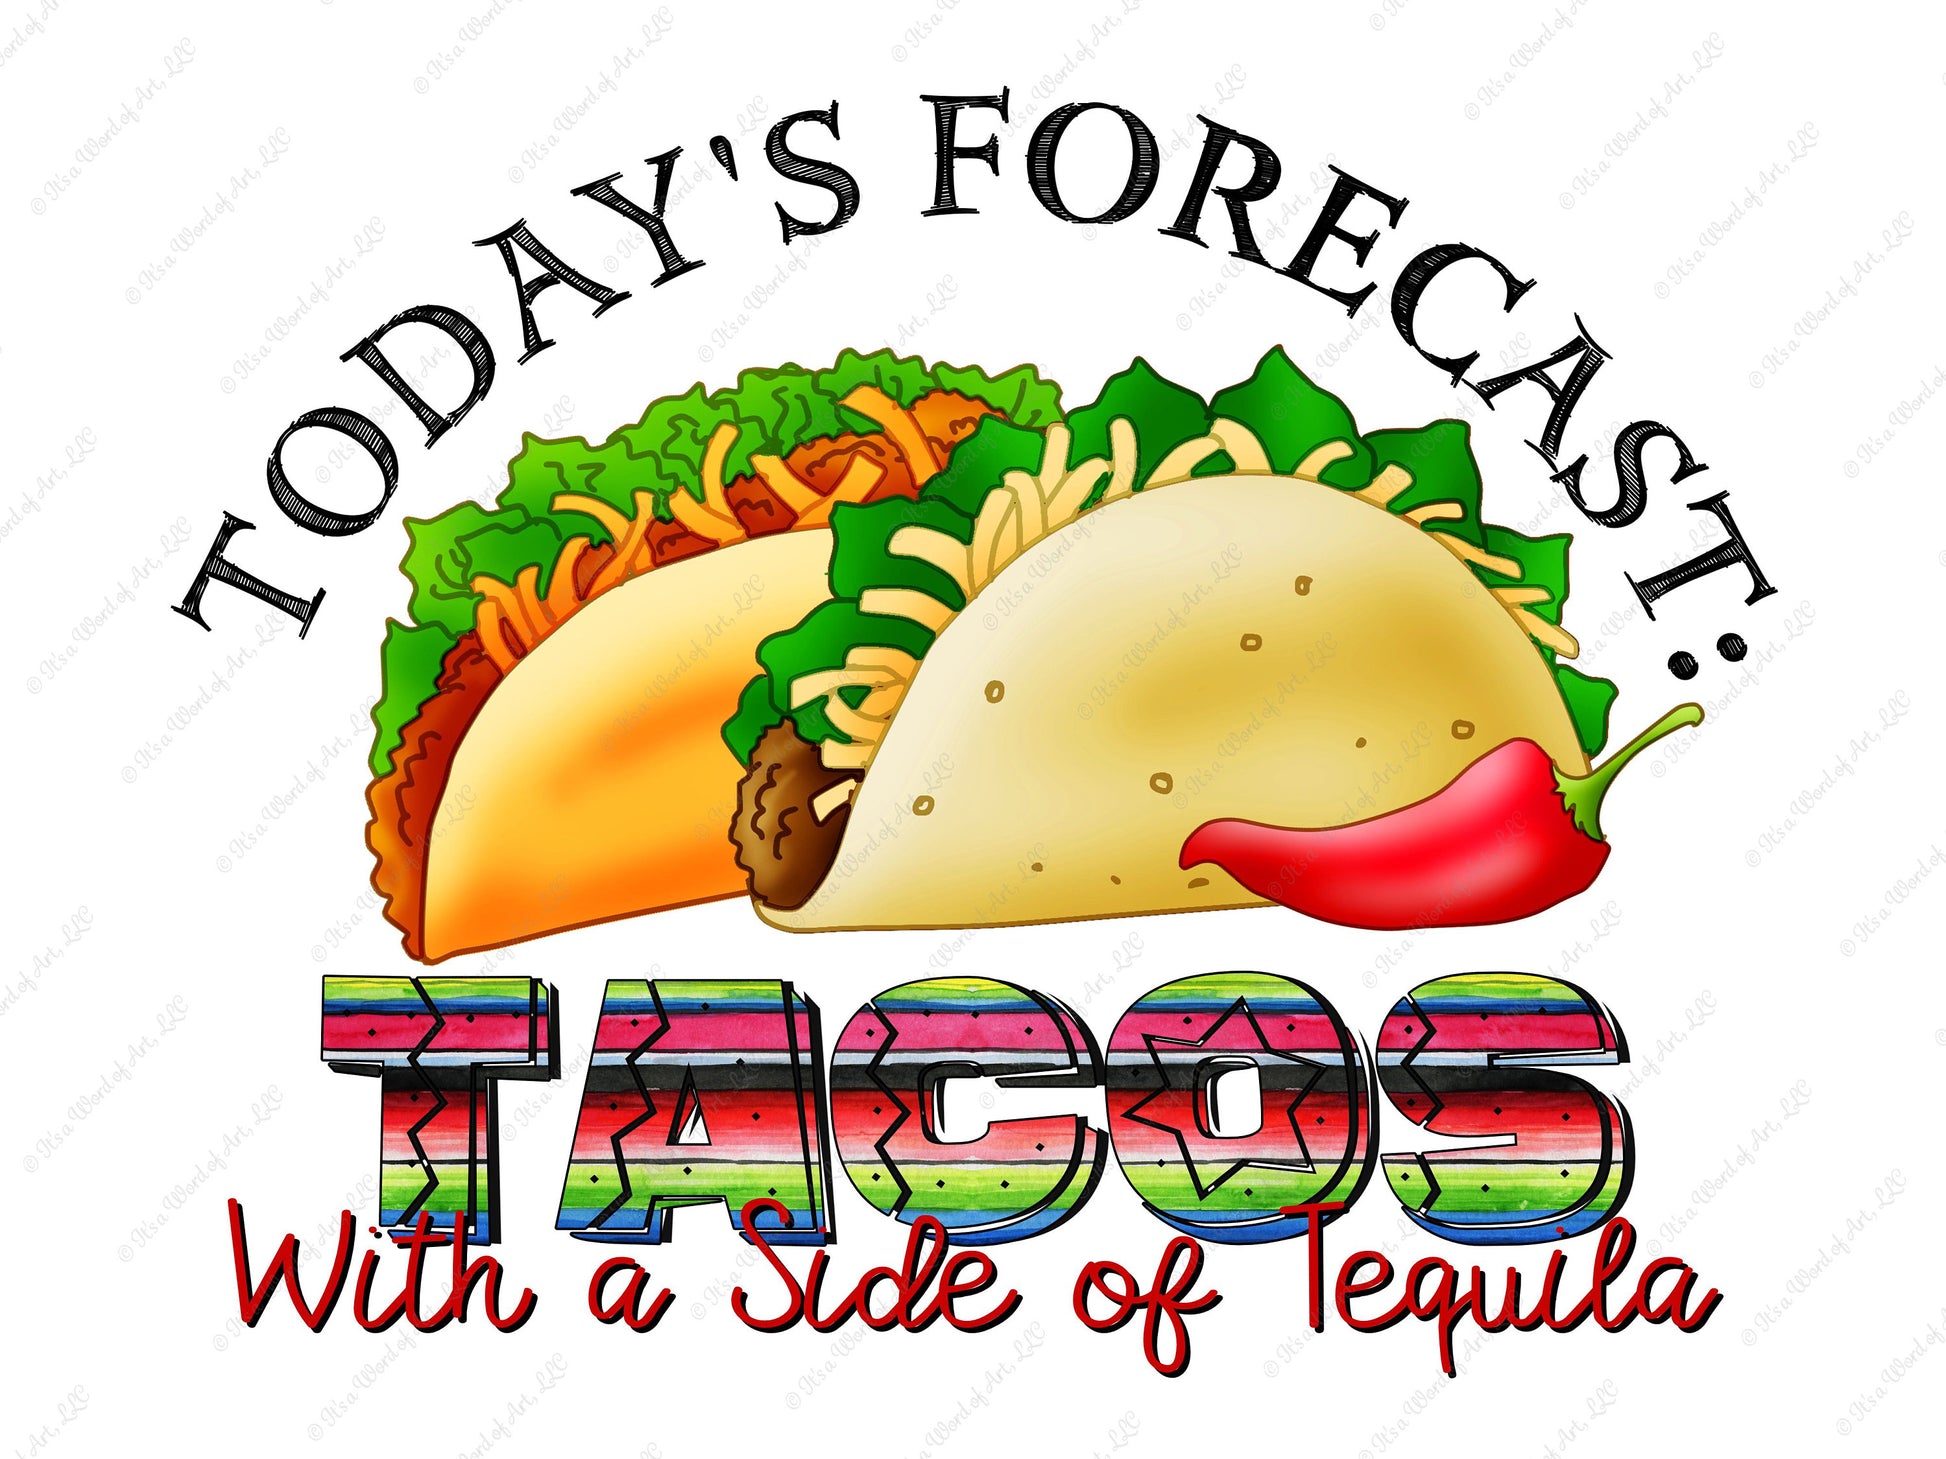 Tacos with a side of Tequila - Cute Taco Tequila Shirt - Sublimation Transfer Set/Ready To Press Sublimation Transfer/Sublimation Transfer